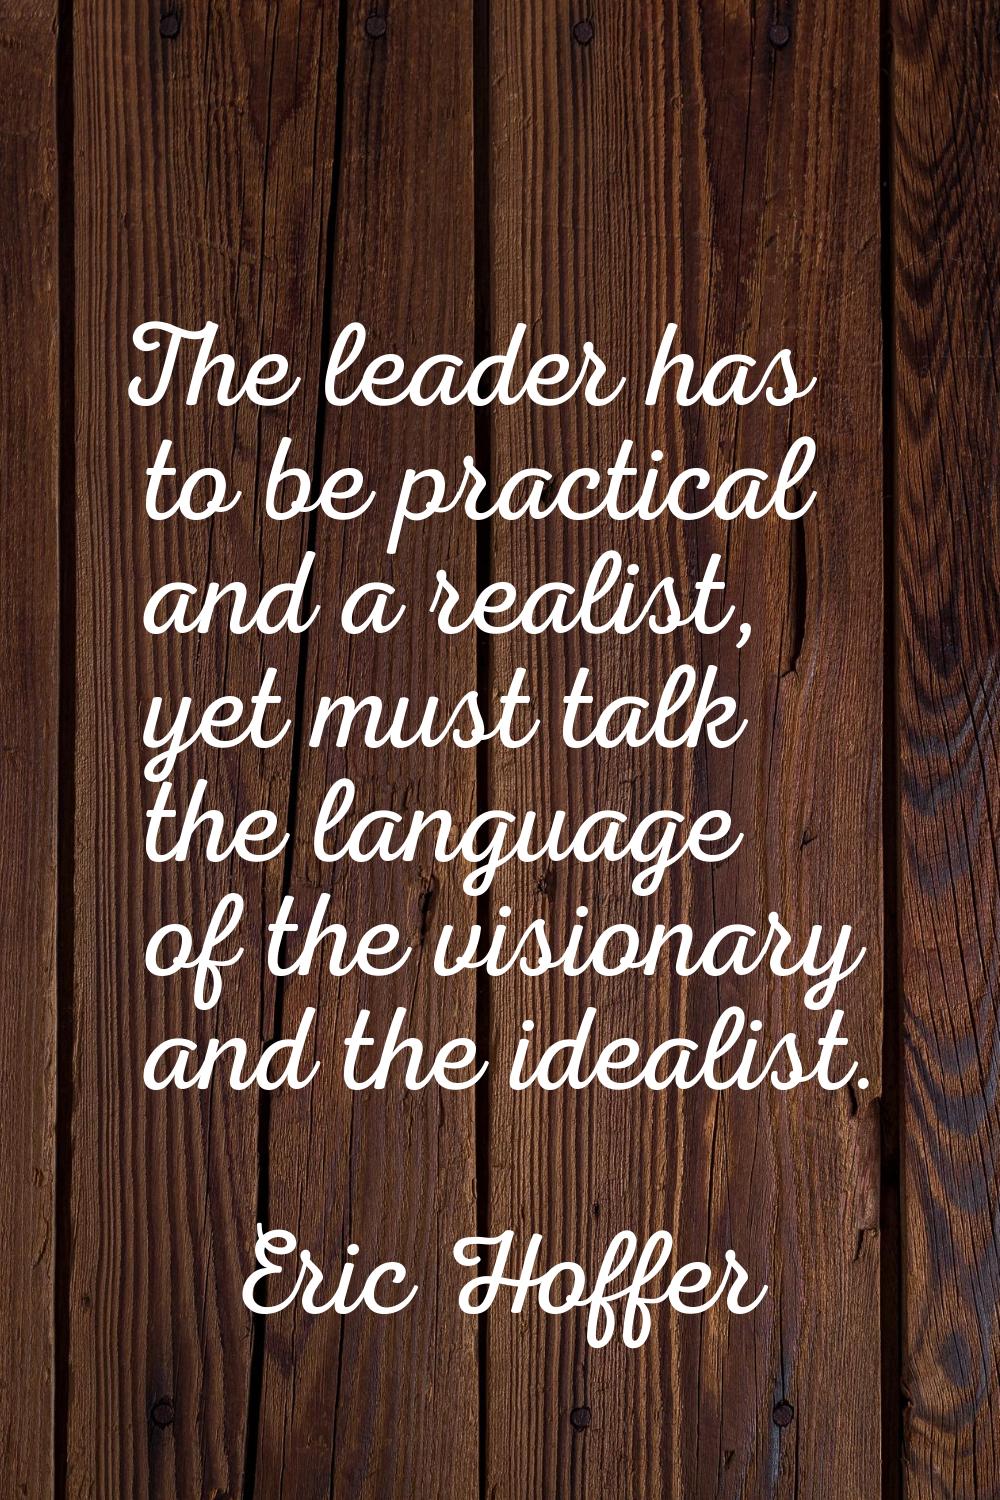 The leader has to be practical and a realist, yet must talk the language of the visionary and the i